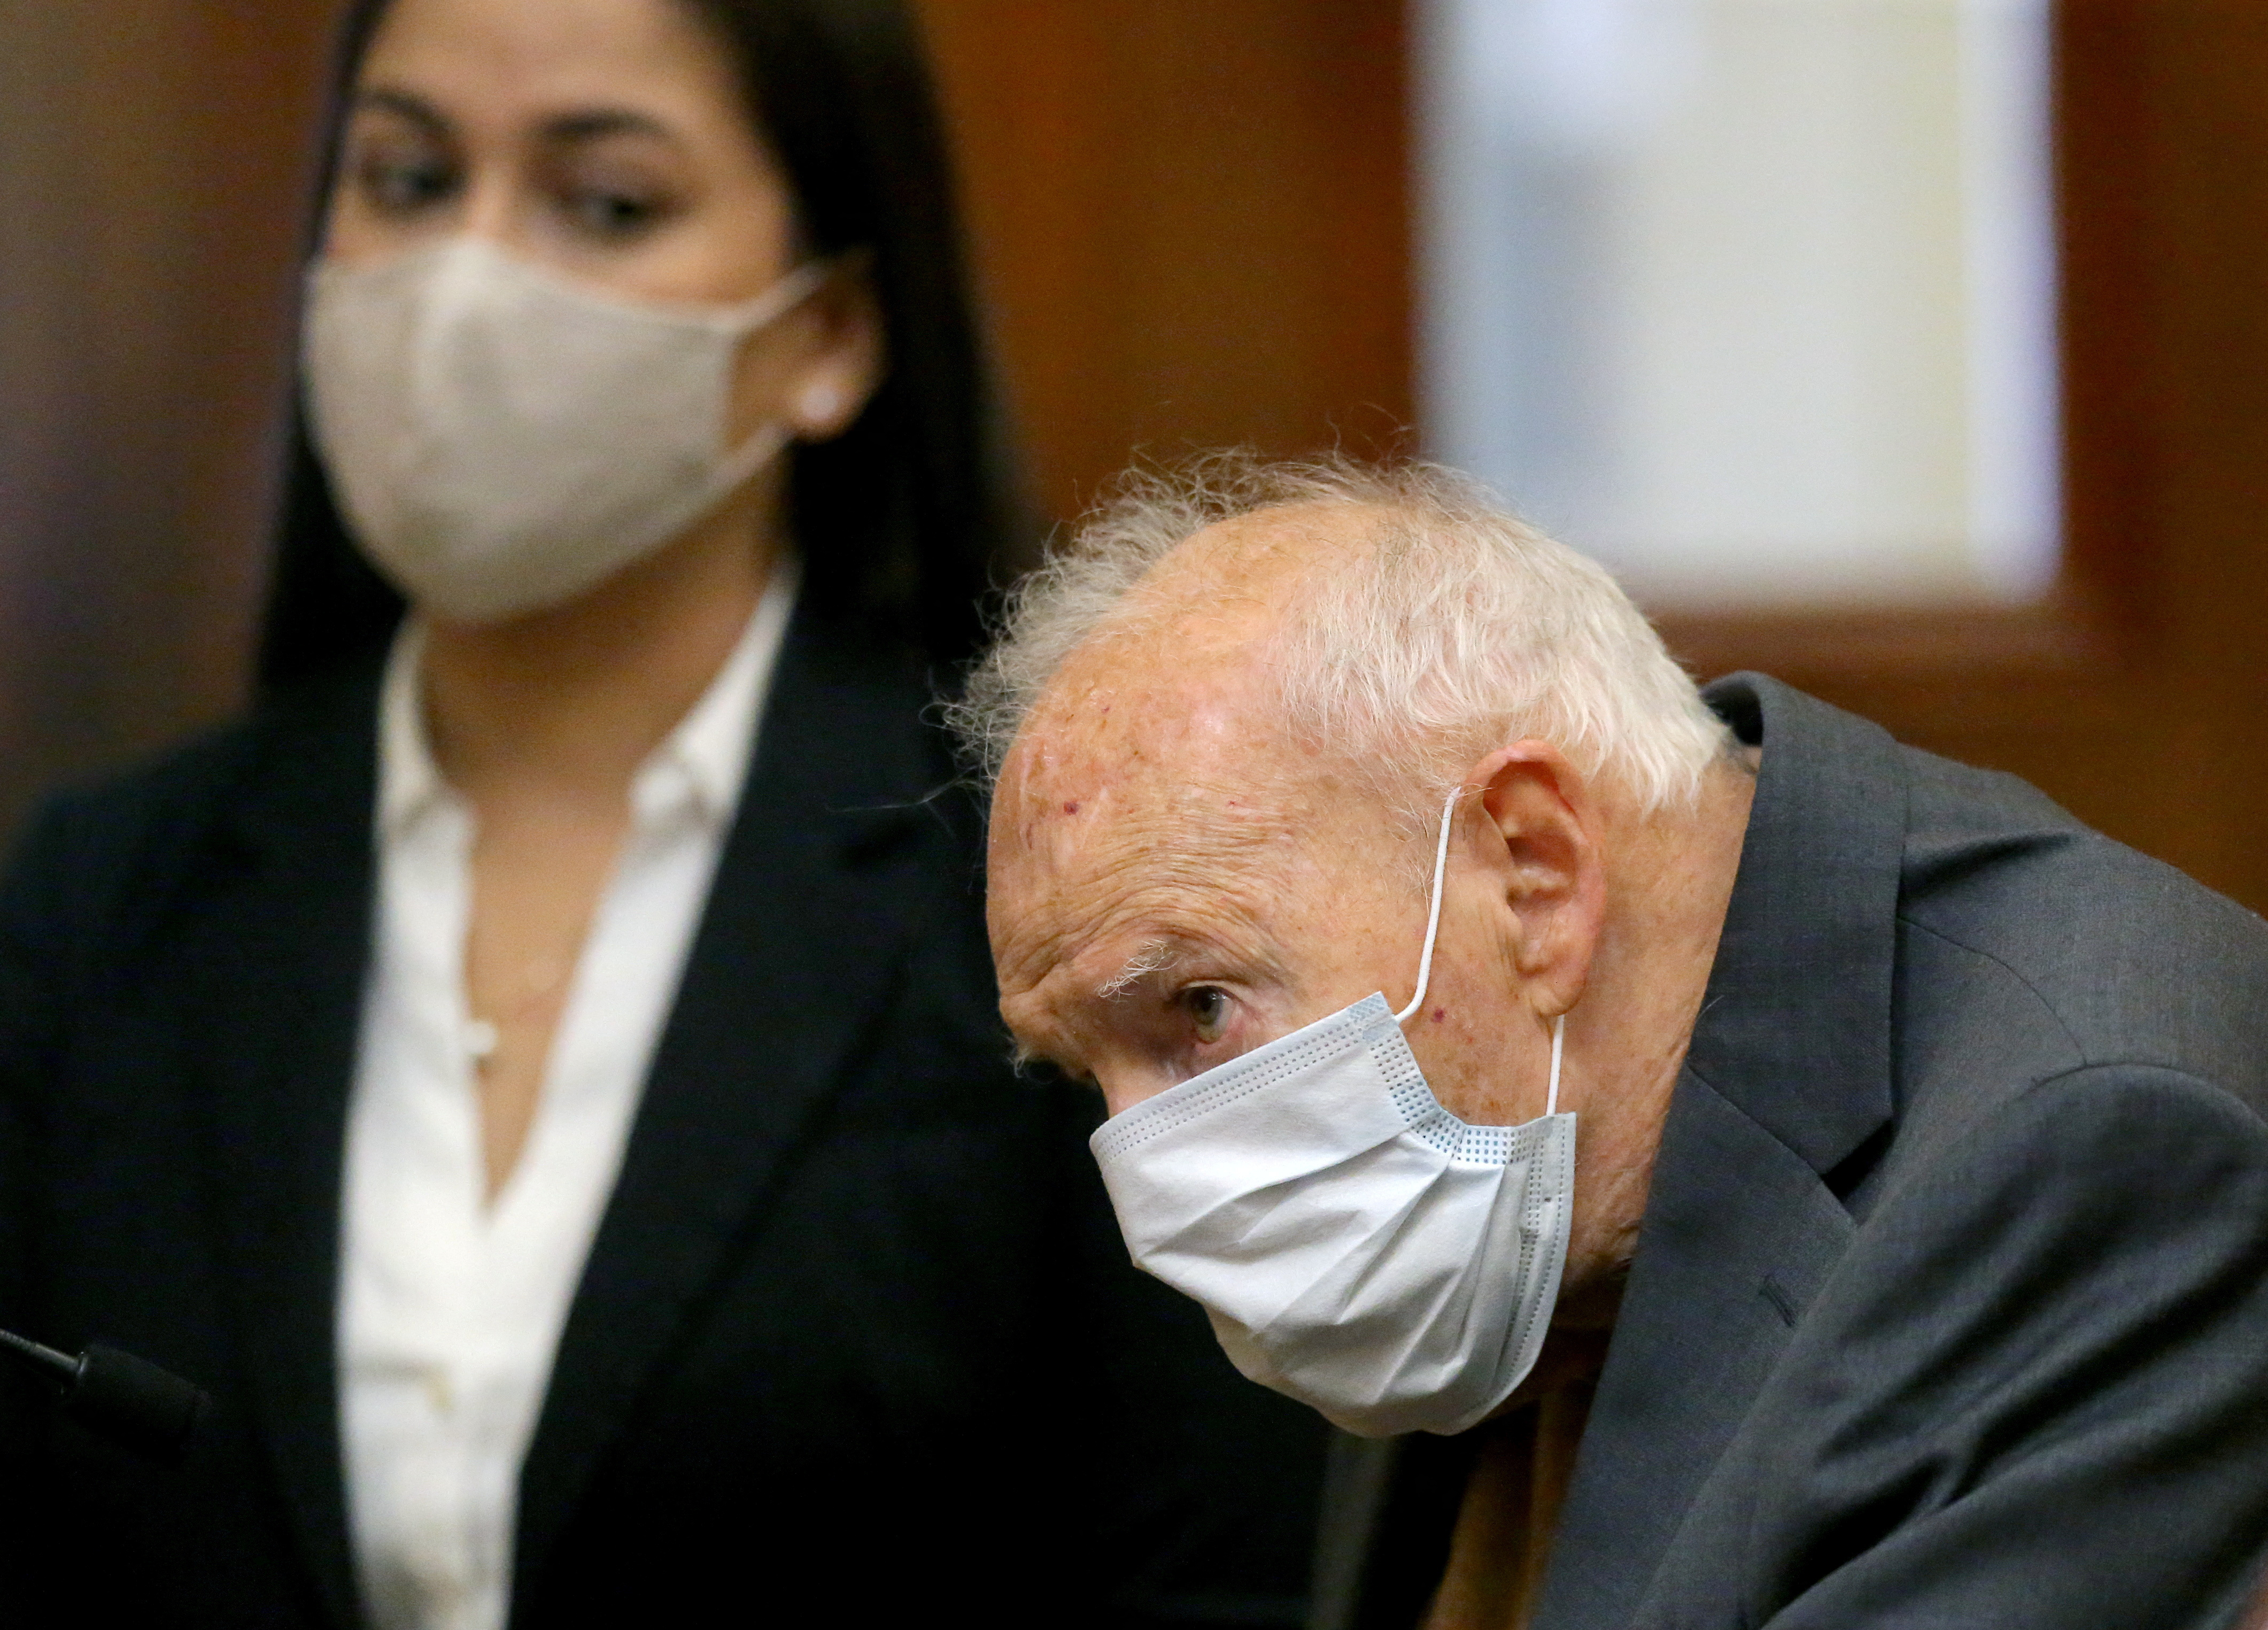 Former Roman Catholic Cardinal Theodore McCarrick wears a mask during arraignment at Dedham District Court